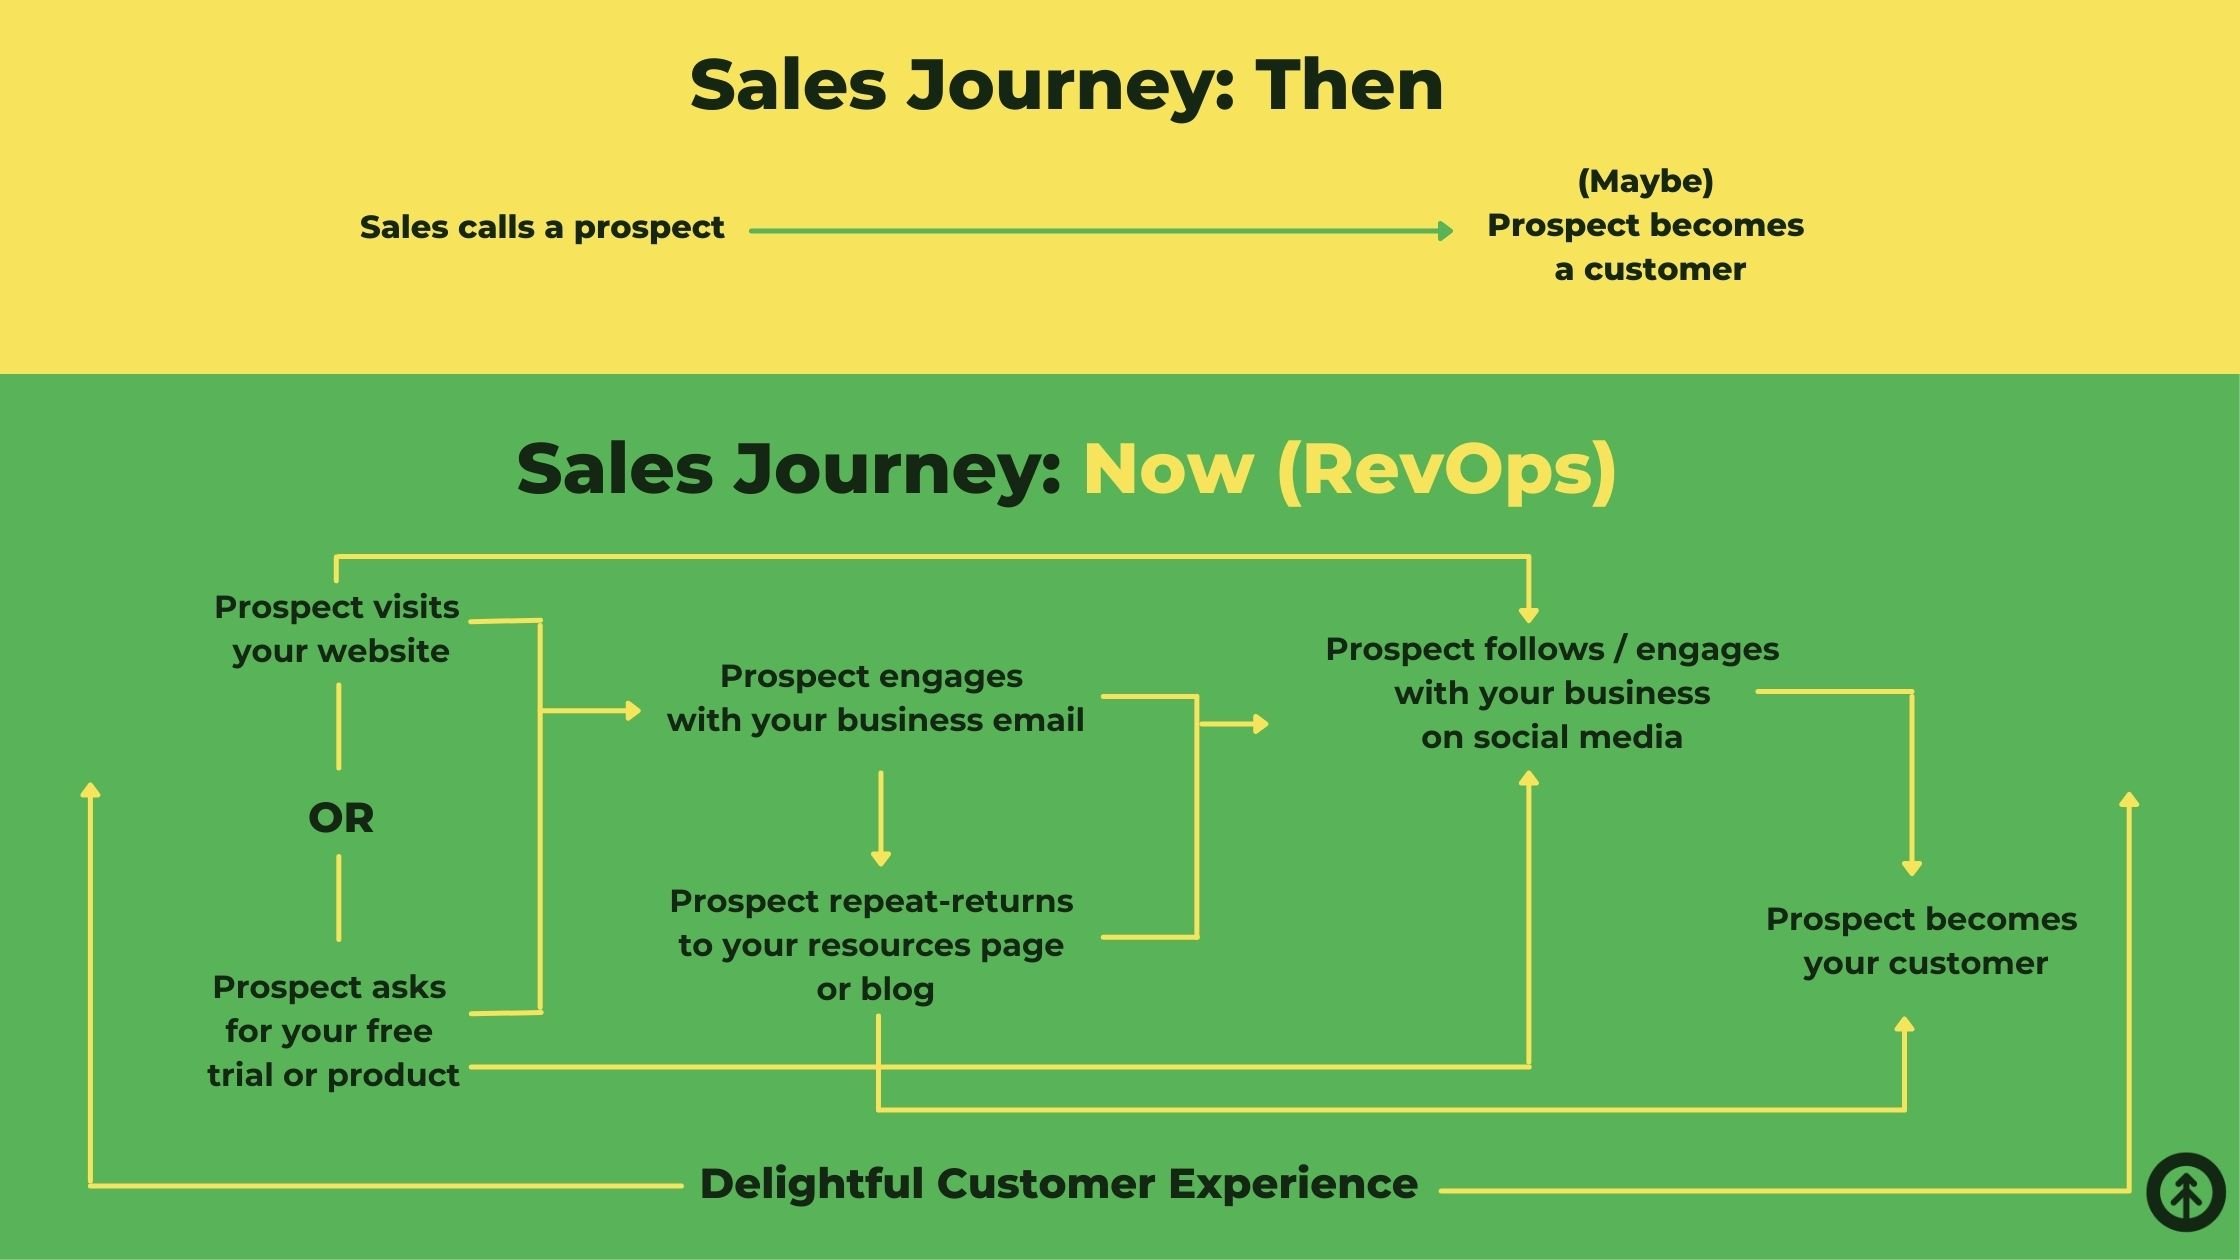 Growth Marketing Firm infographic showing the sales journey in the past and the revops concept for the sales journey now. 